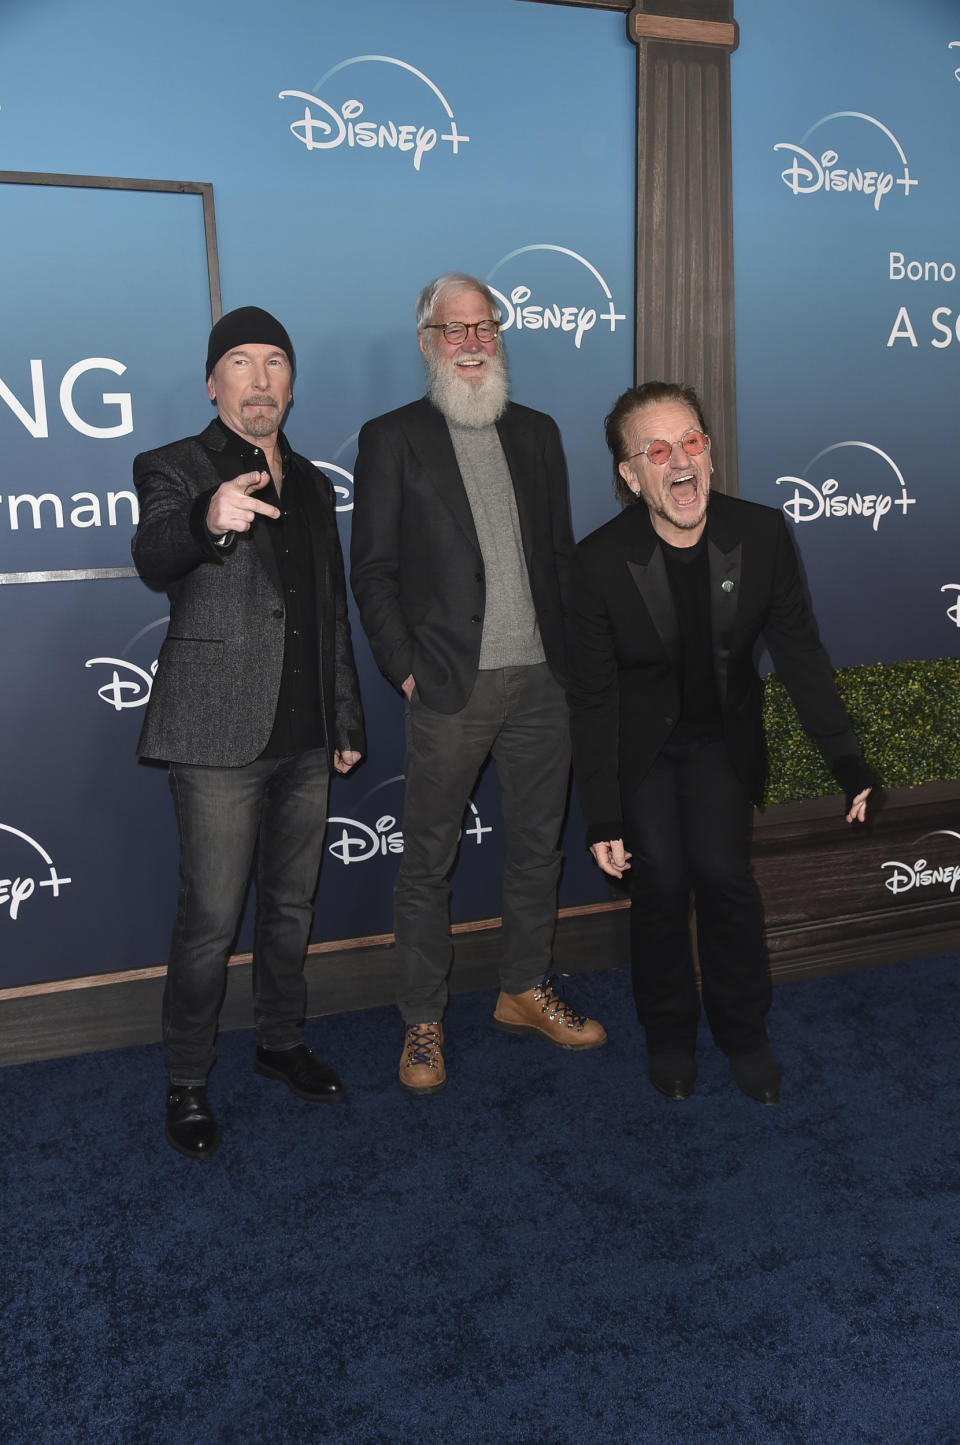 The Edge, from left, David Letterman and Bono arrive at the premiere of "Bono & The Edge: A Sort of Homecoming, With Dave Letterman" on Wednesday, March 8, 2023, at The Orpheum Theatre in Los Angeles. (Photo by Richard Shotwell/Invision/AP)